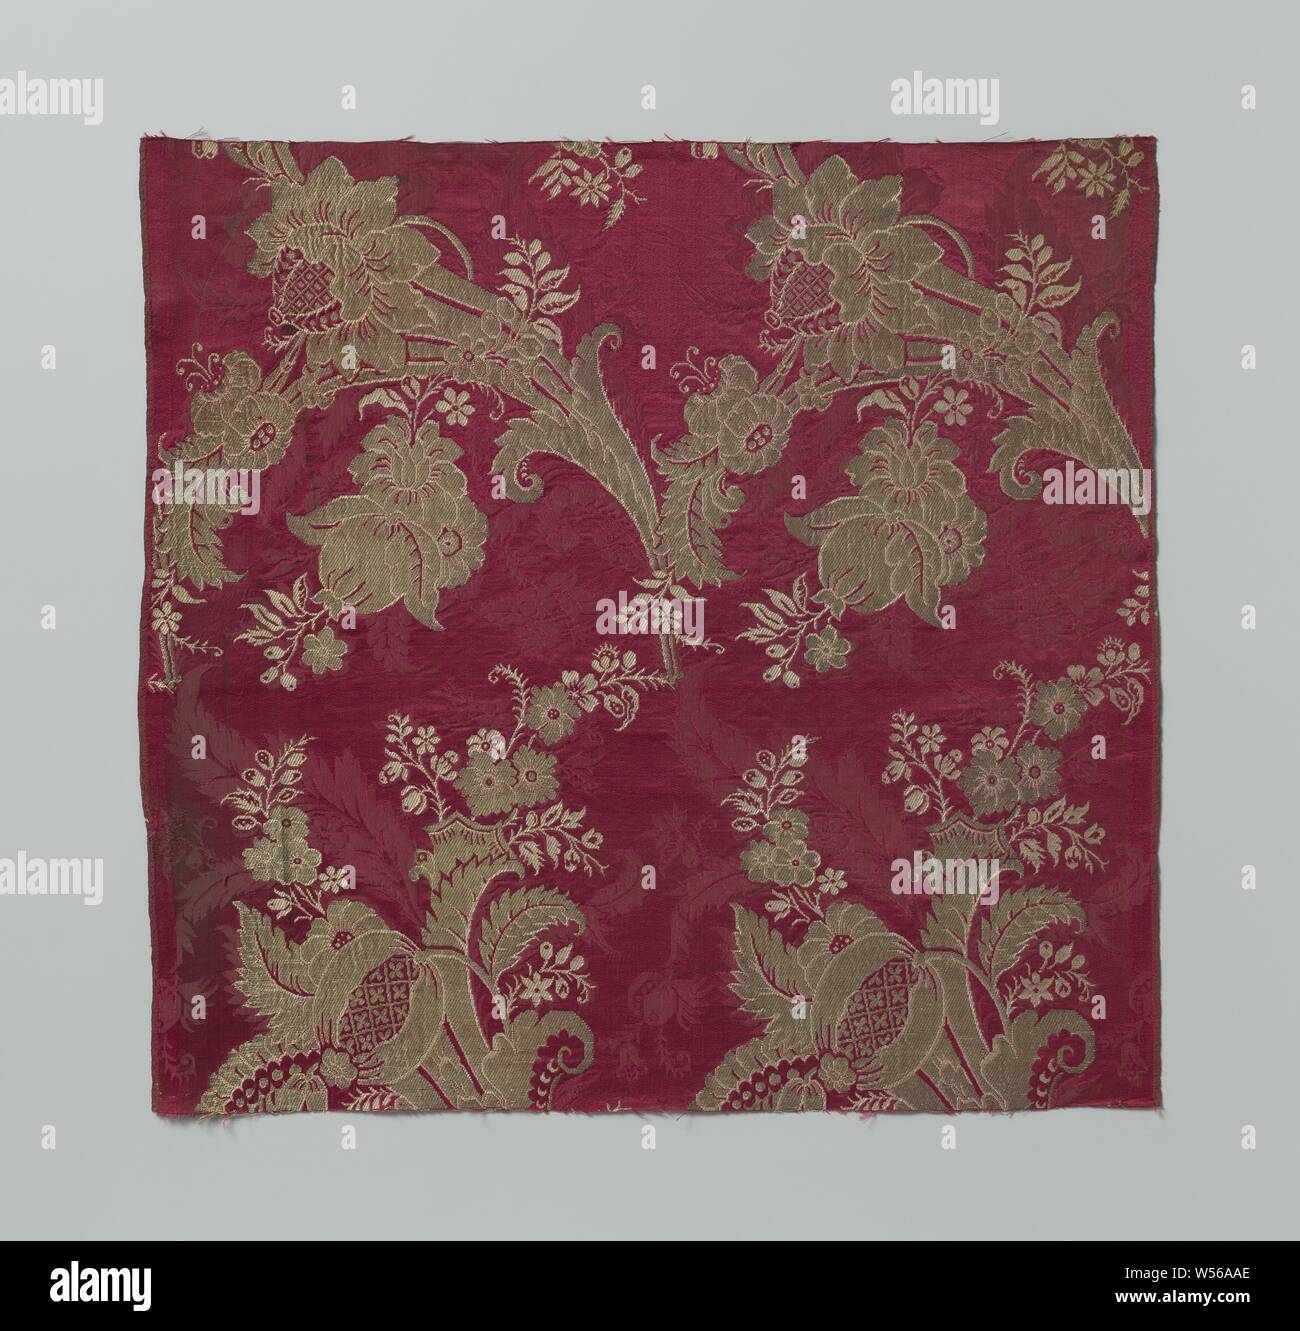 Fragment of carmine-red damask with golden silk fabric with a pattern of stylized leaves and flowers with curved umbels of flowers, leaves and fruits, A fragment of carmine-red damask with a pattern of stylized leaves and flowers, on which silver wire pattern of rows of flower bulbs curving left and right alternately filled with pomegranates and rosette flowers with a pear-shaped heart. Silver and white., anonymous, Netherlands, c. 1695 - c. 1760, silk, damask, h 49 cm × w 51.5 cm w 25.5 cm w 0.4 cm Stock Photo